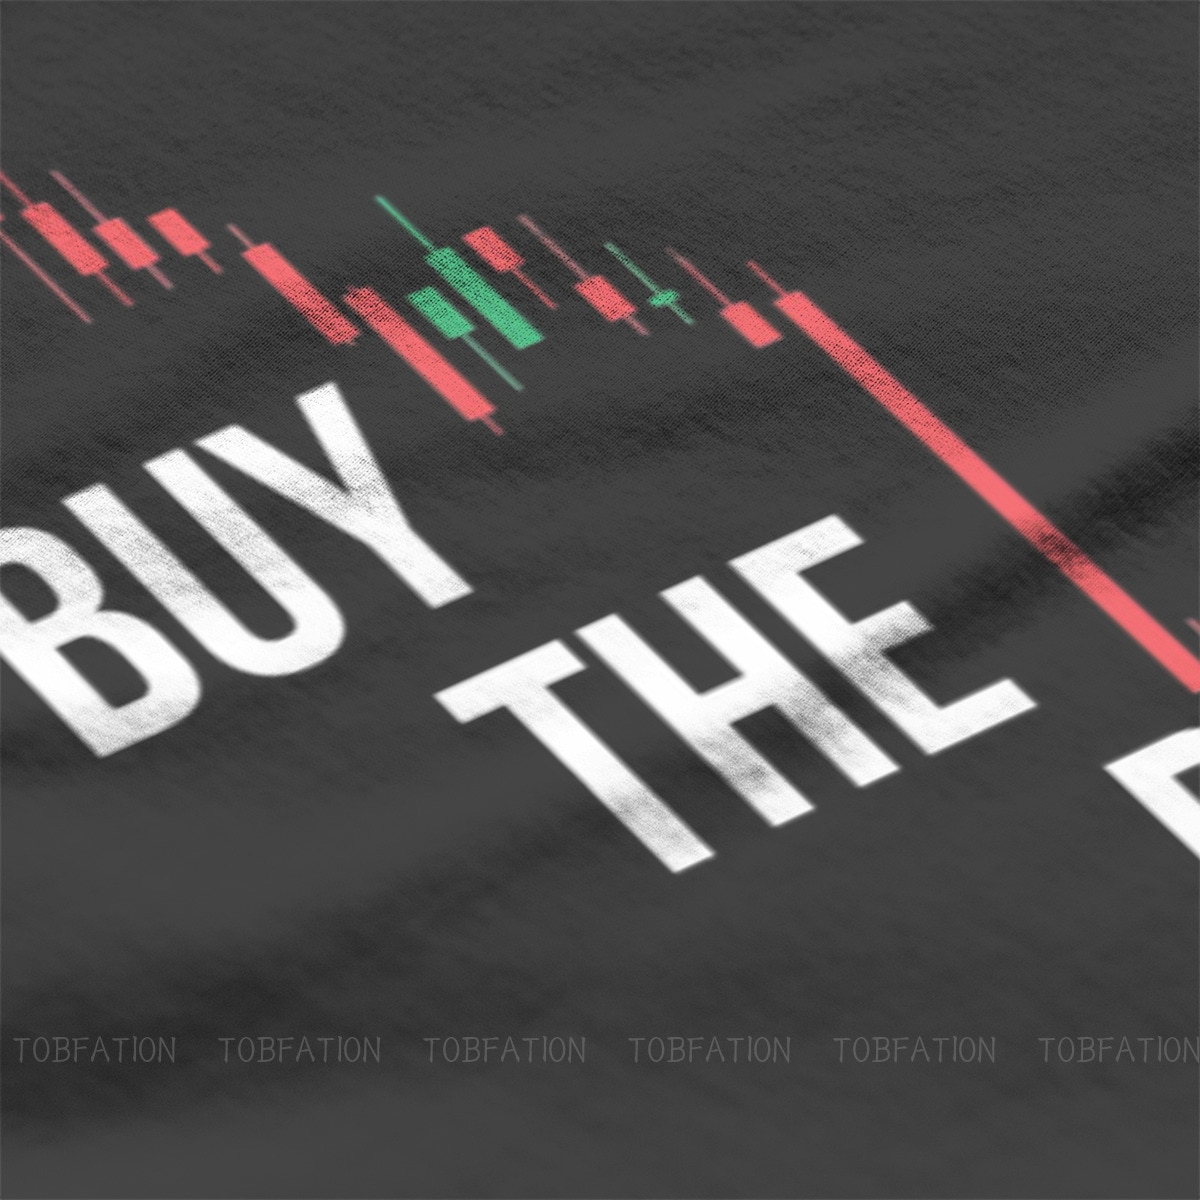 Cryptocurrencies “Buy The Dip” Themed Premium T-Shirts (15+ Designs) T-Shirts & Tank Tops